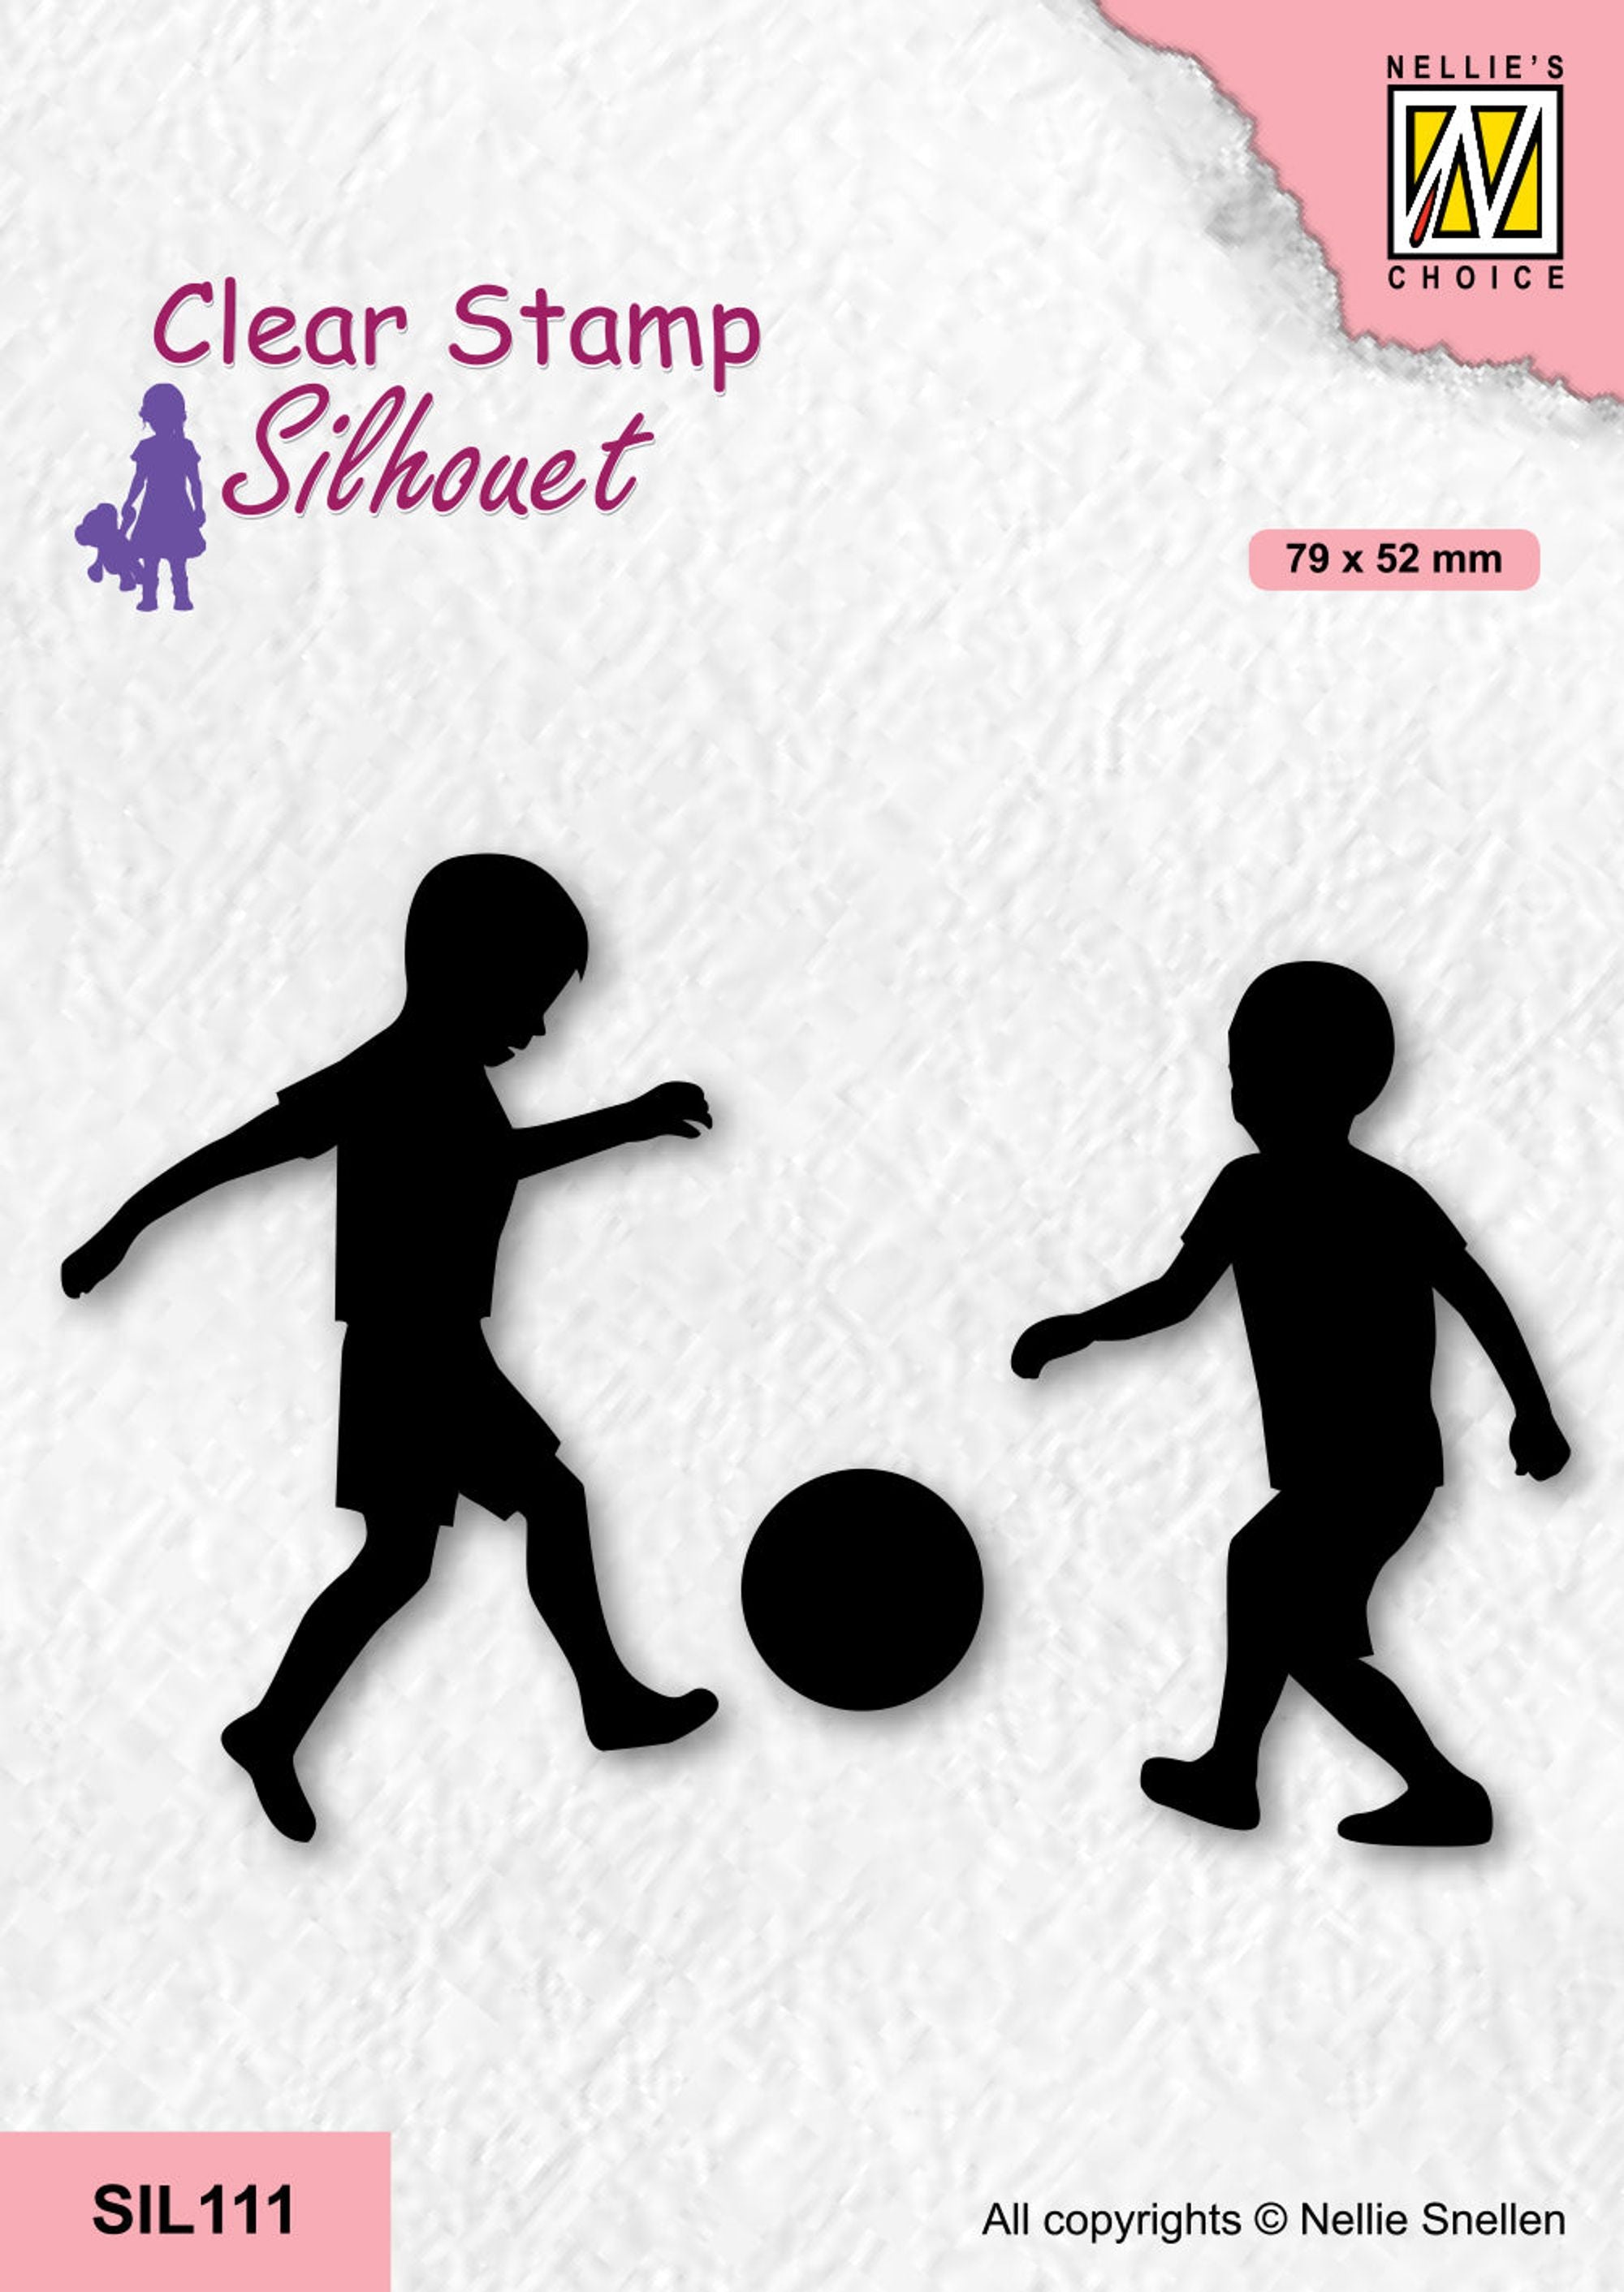 Nellie's Choice Clear Stamp Silhouette - Boys Playing Soccer